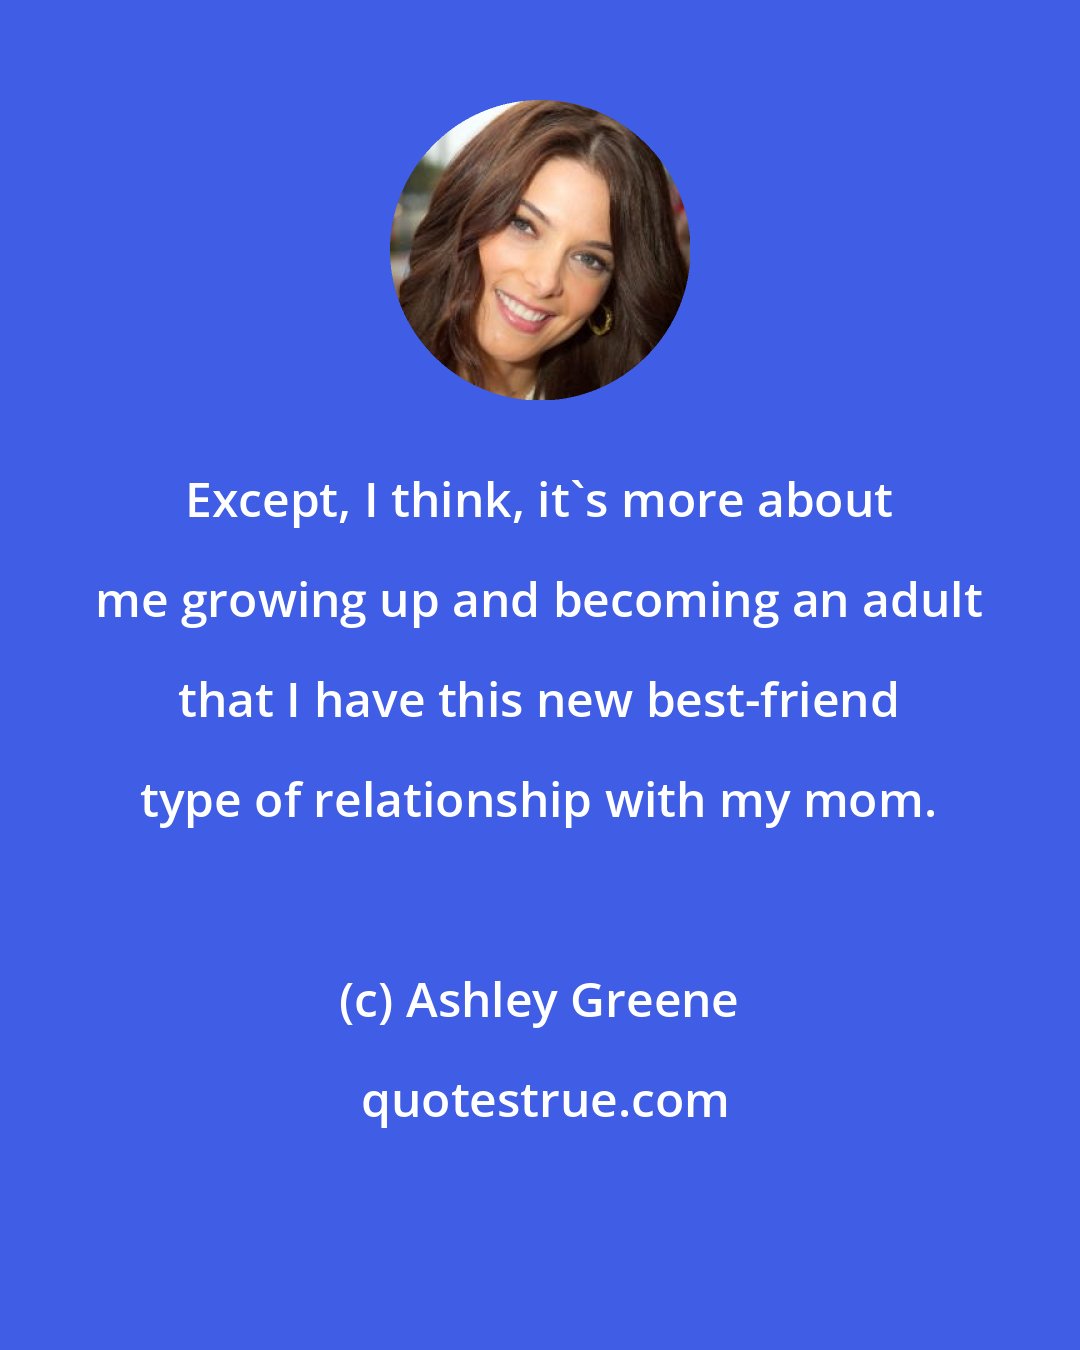 Ashley Greene: Except, I think, it's more about me growing up and becoming an adult that I have this new best-friend type of relationship with my mom.